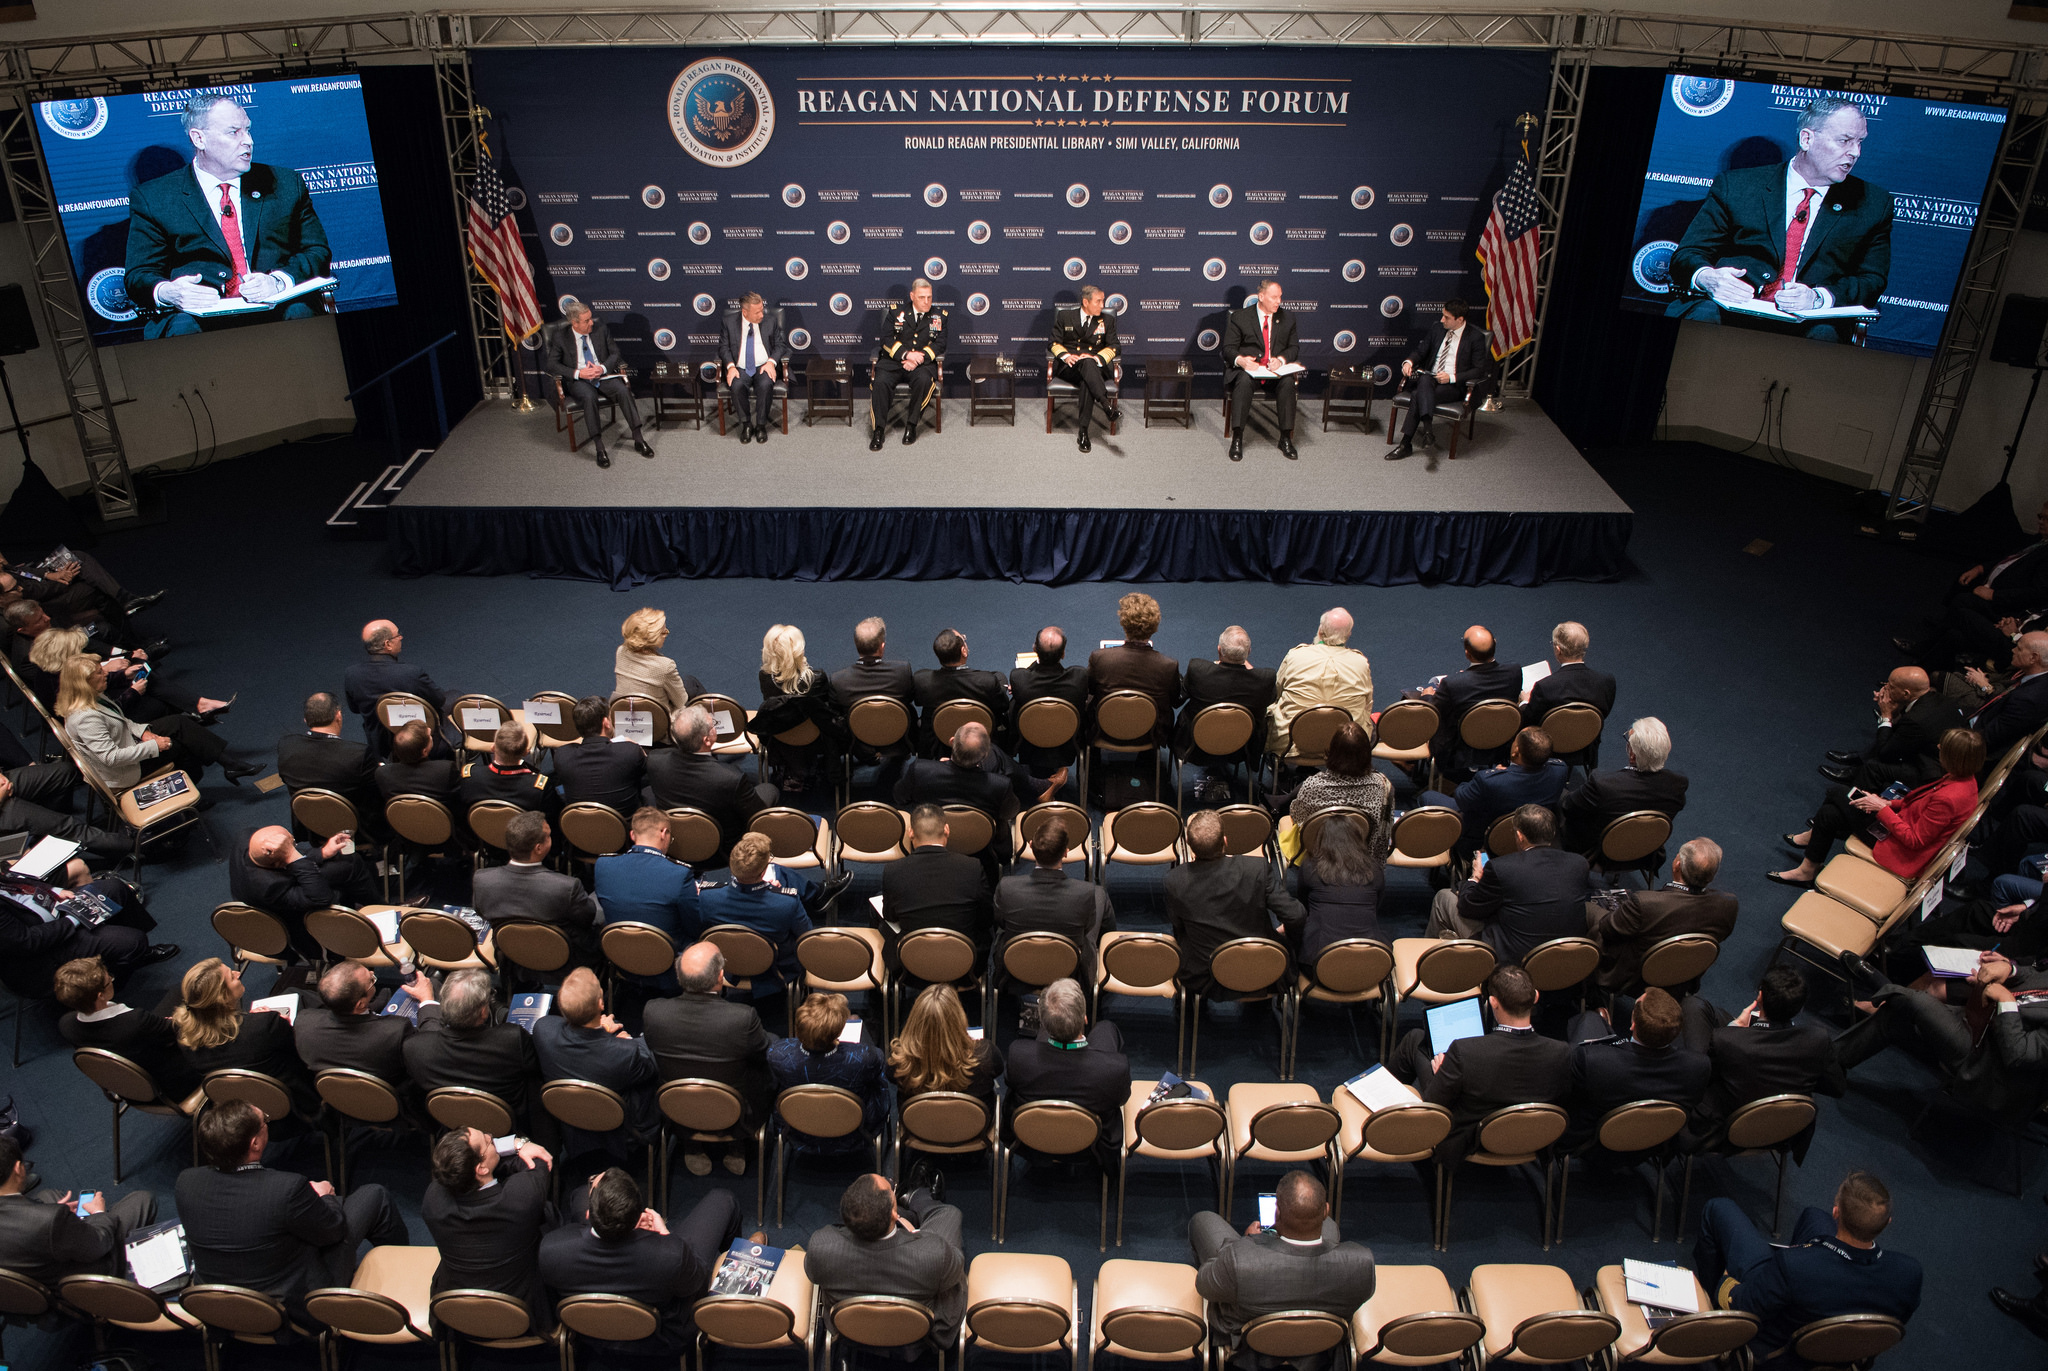 Deputy Defense Secretary Bob Work, second from right on stage, and other defense leaders participate in a panel discussion at the Reagan National Defense Forum in Simi Valley, Calif., Dec. 3, 2016. DoD photo by Army Sgt. Amber I. Smith. -